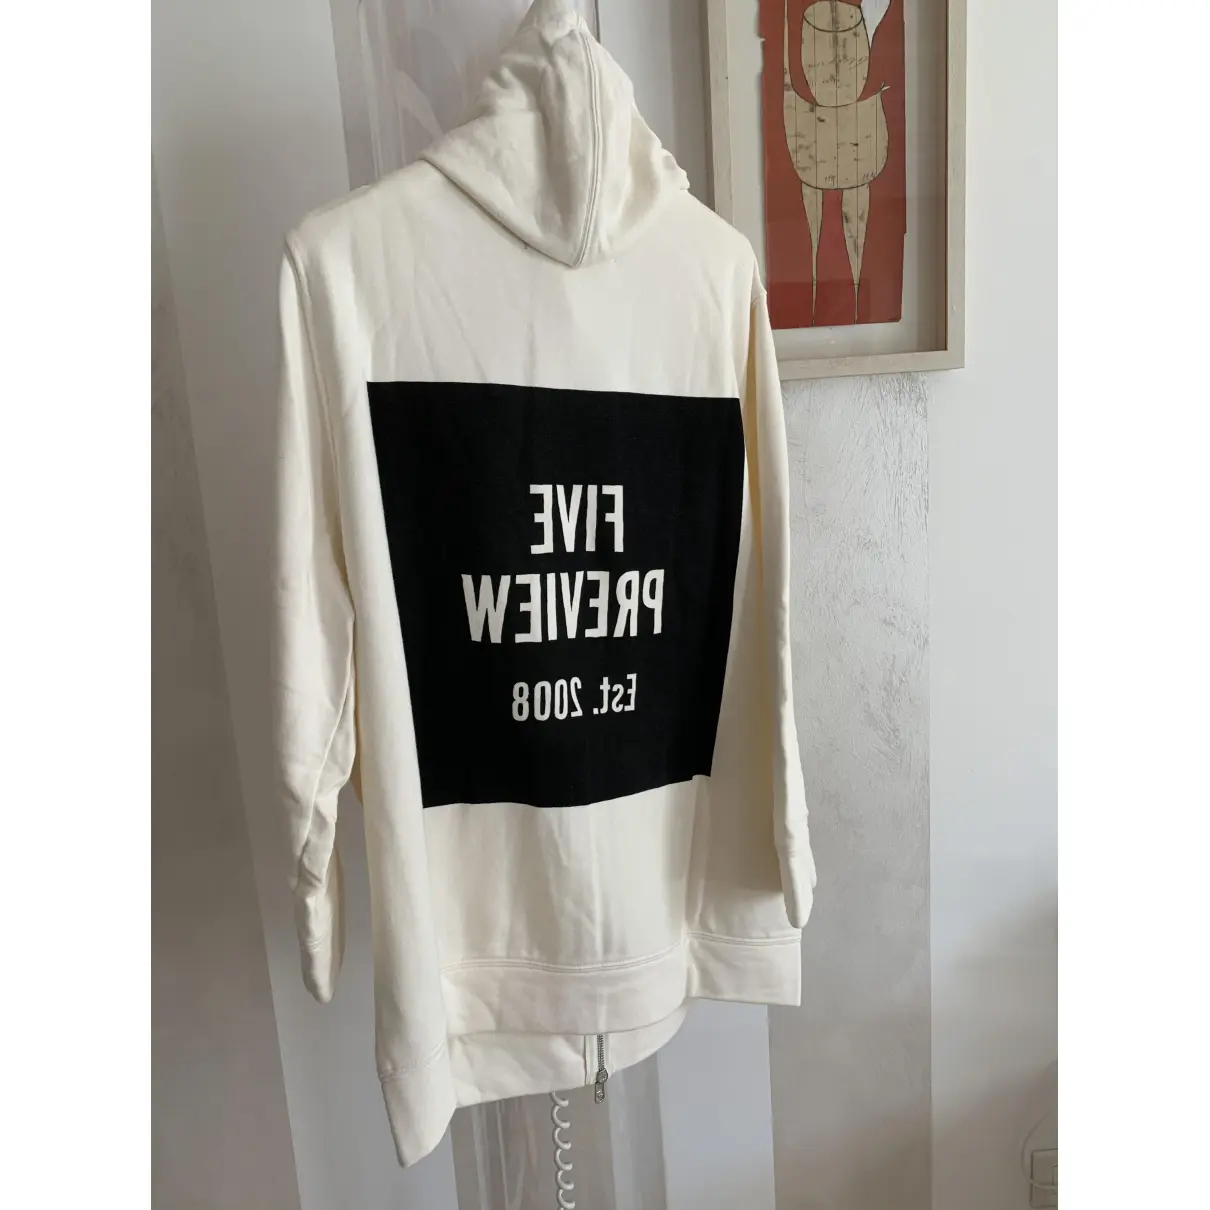 Buy 5 Preview White Cotton Jacket online